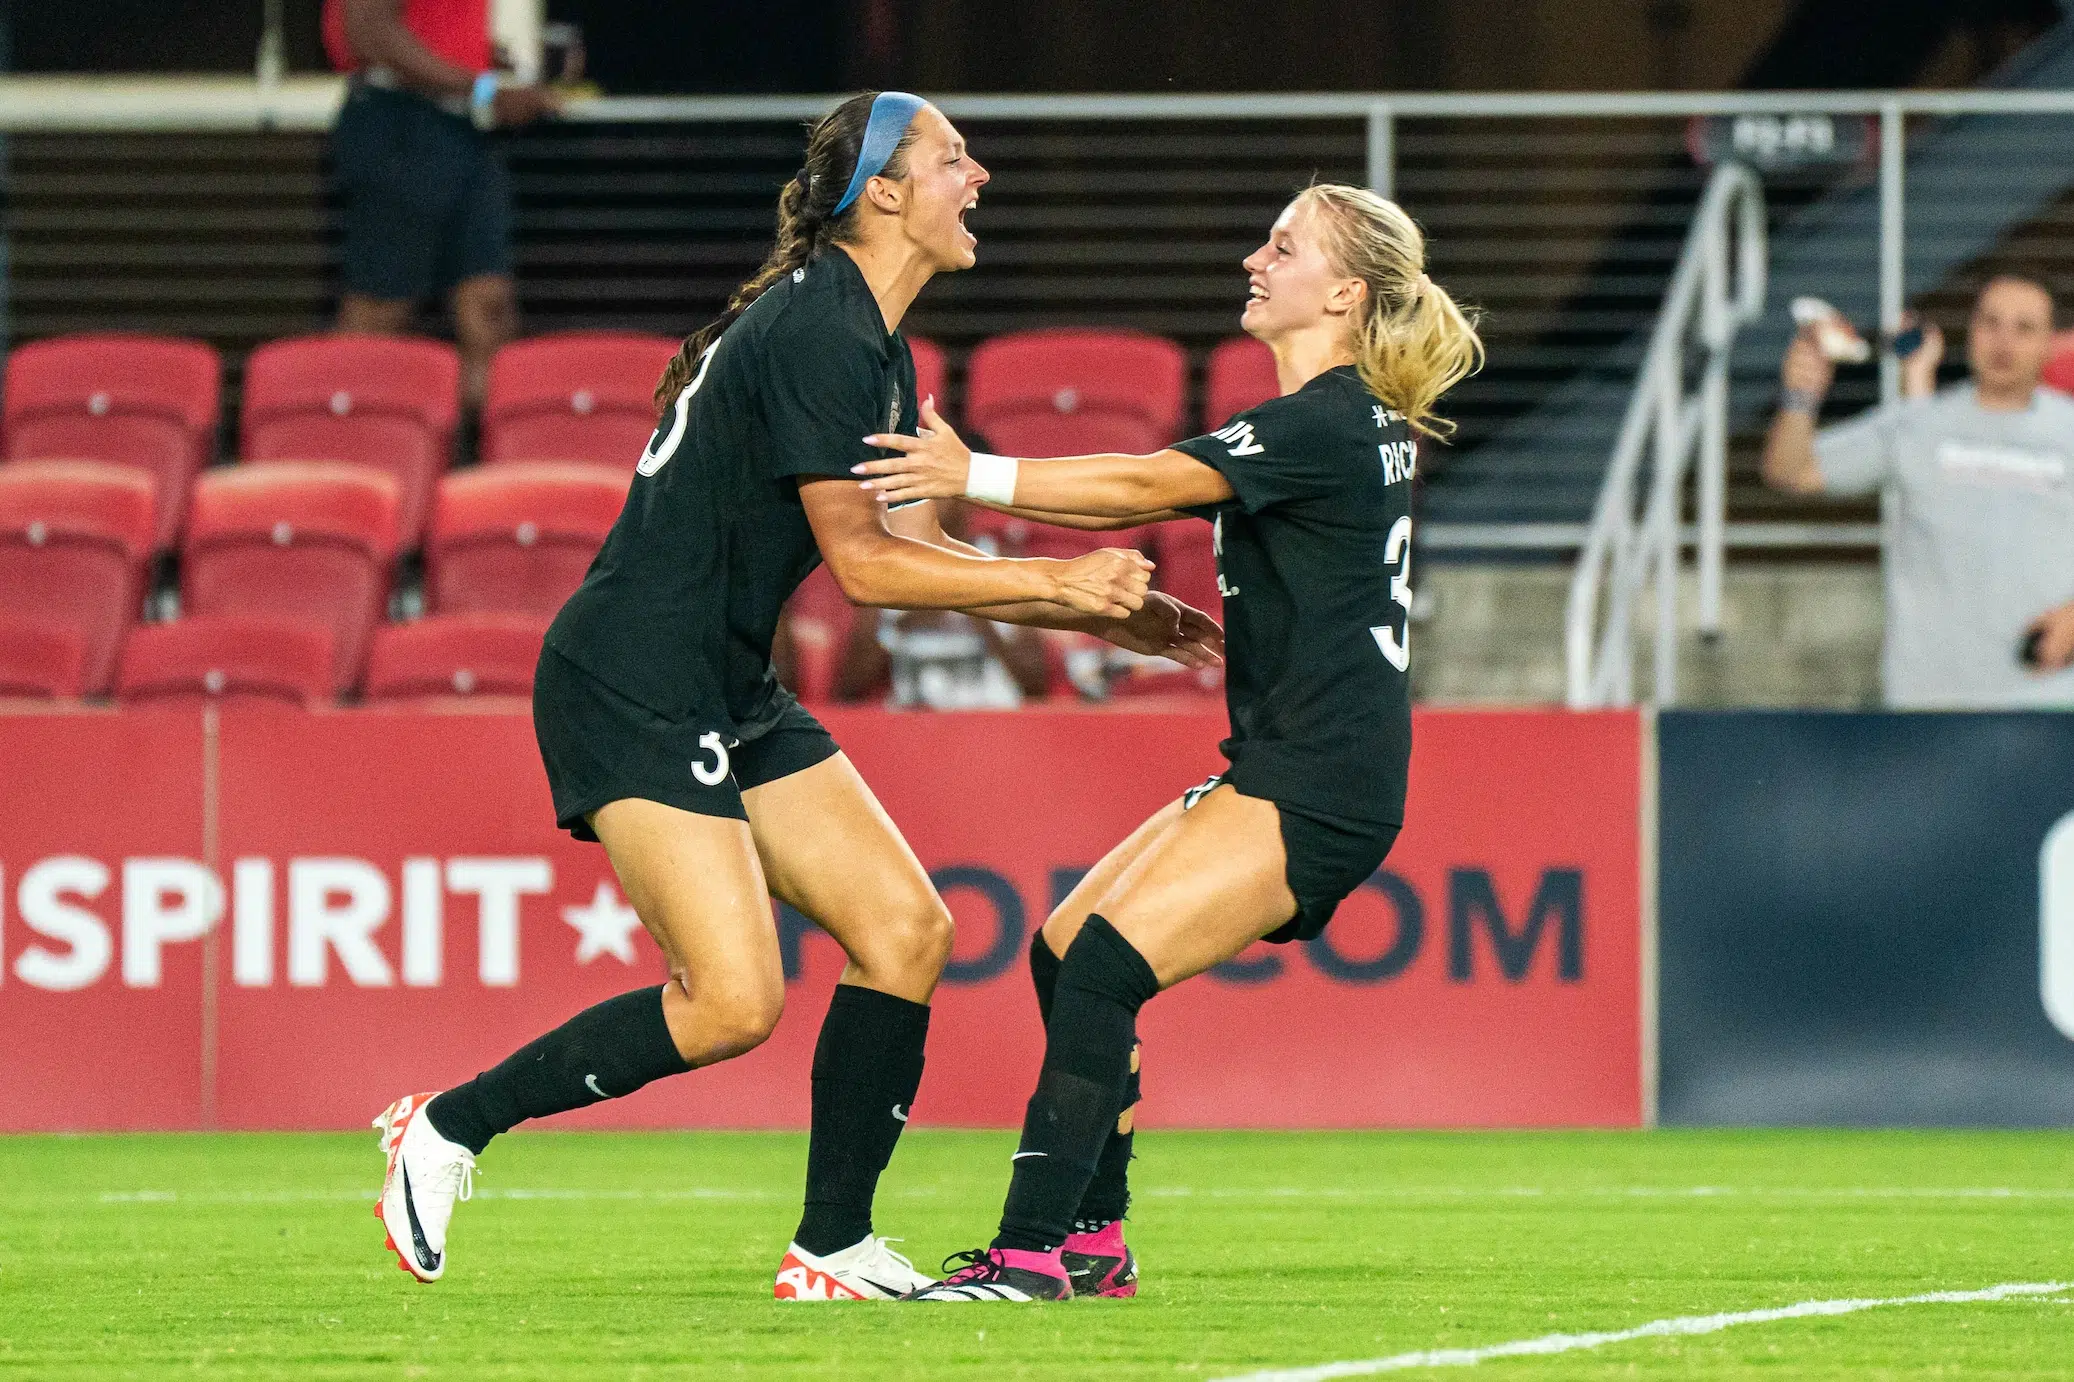 Ashley Hatch and Chloe Ricketts, both in black uniforms, extend their arms and are about to embrace on a soccer field.